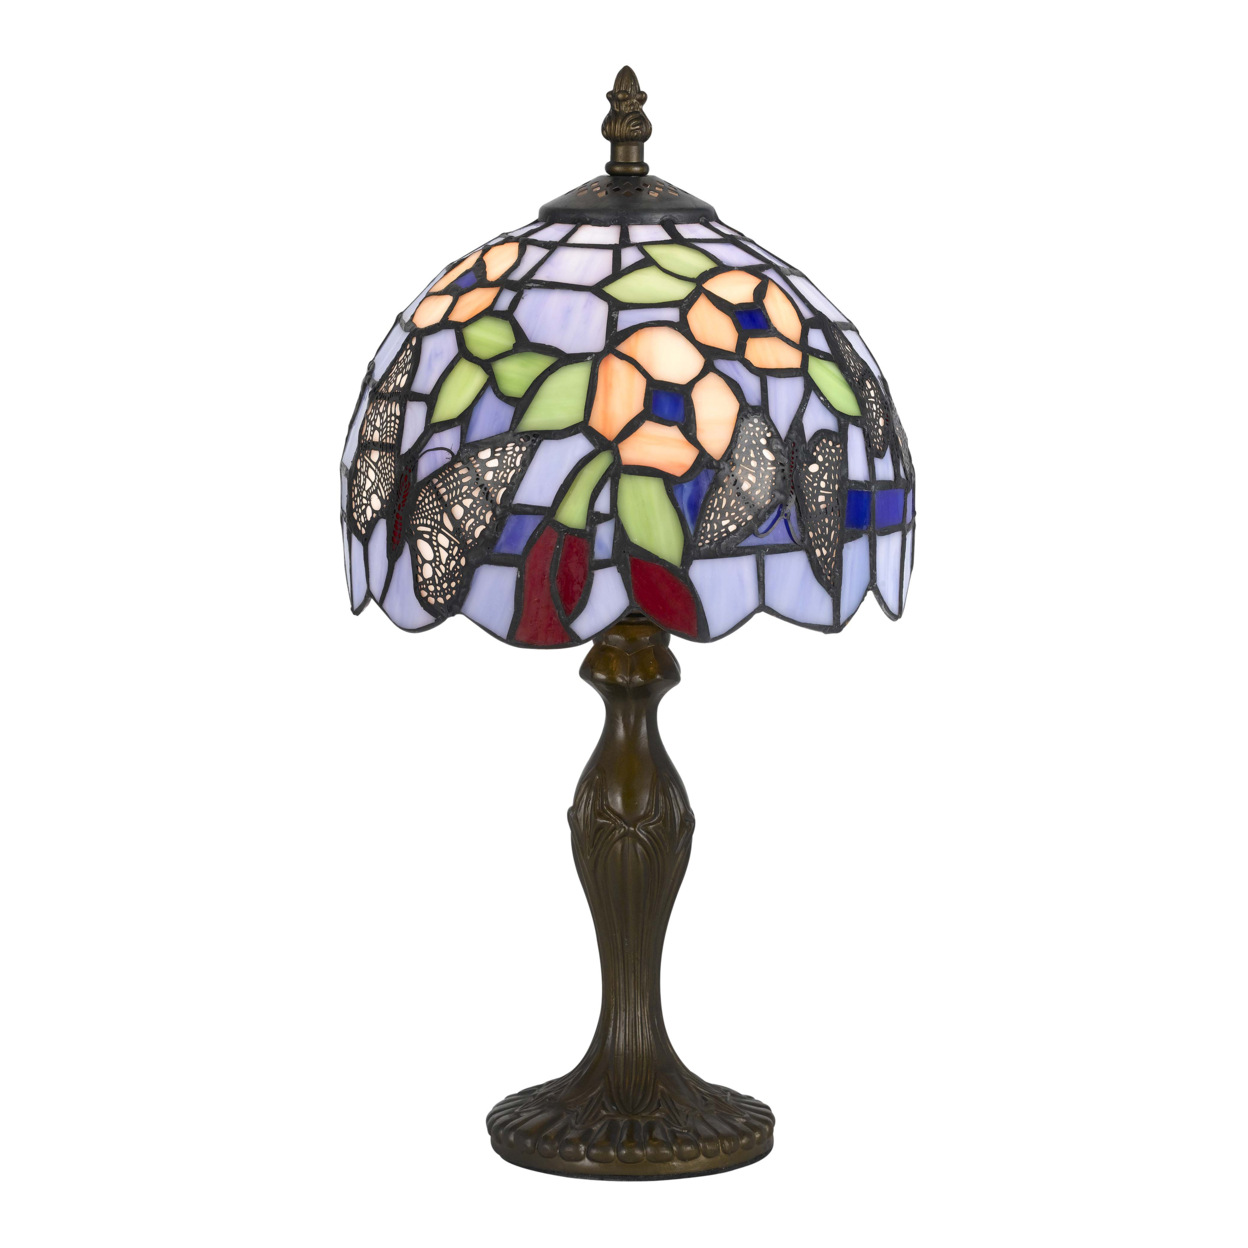 Metal Body Tiffany Table Lamp With Butterfly Design Shade, Multicolor- Saltoro Sherpi